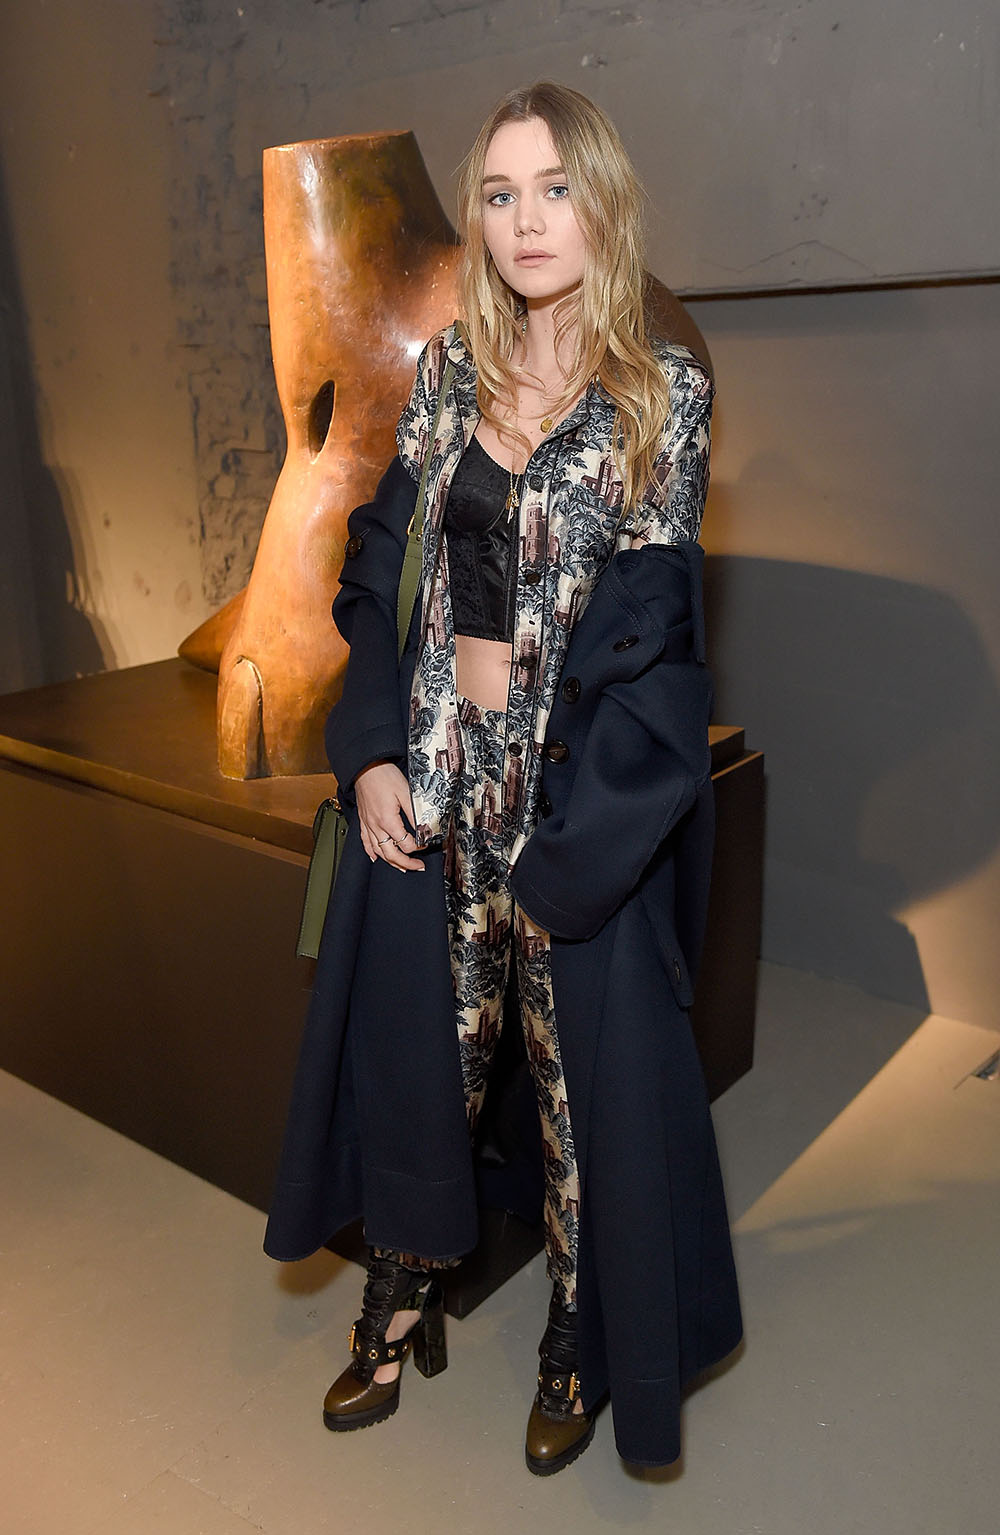 LONDON, ENGLAND - FEBRUARY 20: Immy Waterhouse wearing Burberry attends the Burberry February 2017 Show during London Fashion Week February 2017 at Makers House on February 20, 2017 in London, England. (Photo by David M. Benett/Dave Benett/Getty Images for Burberry)